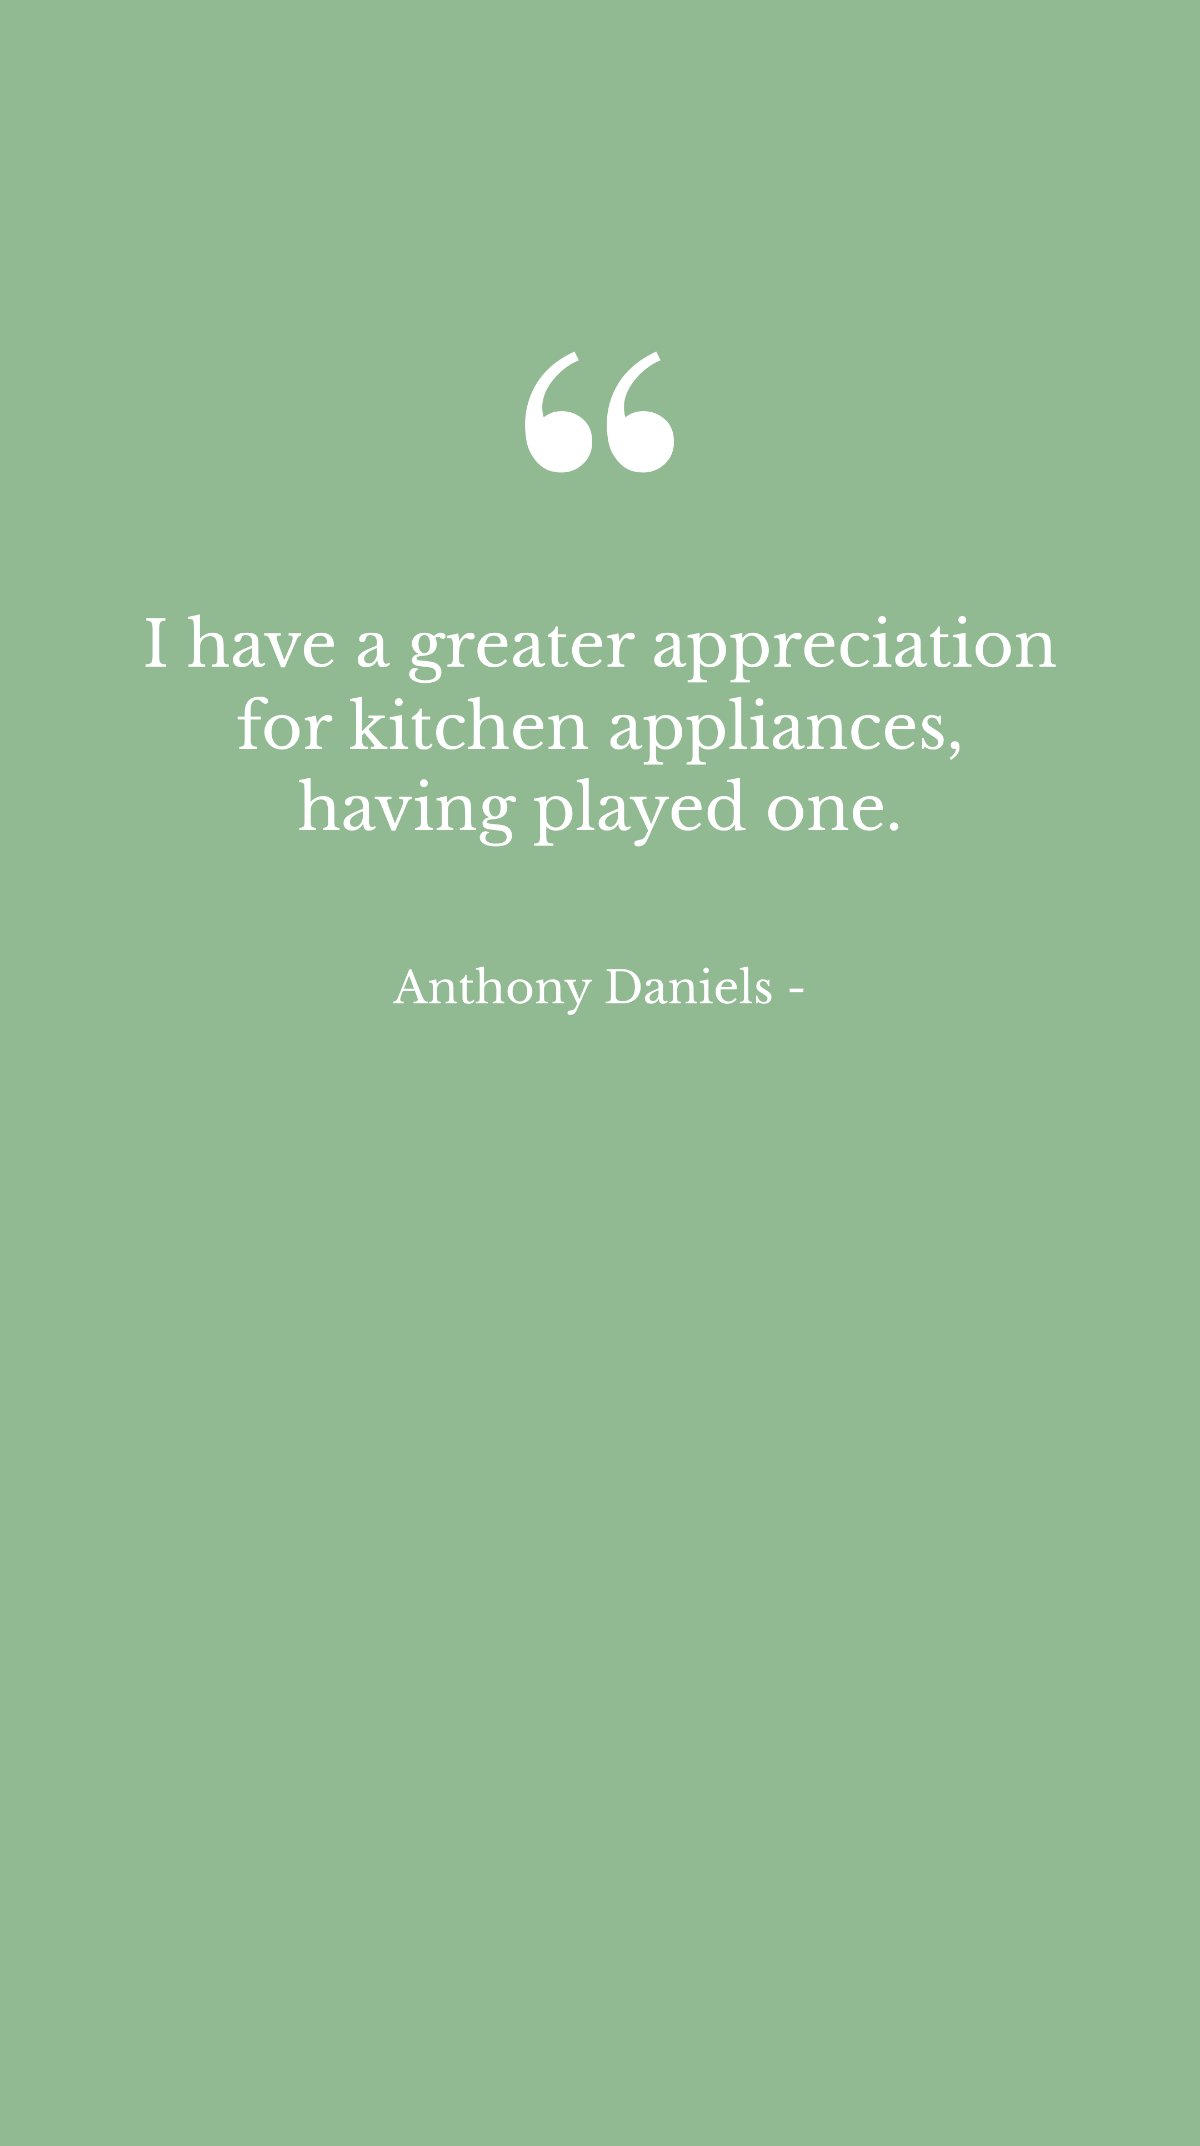 Anthony Daniels - I have a greater appreciation for kitchen appliances, having played one.